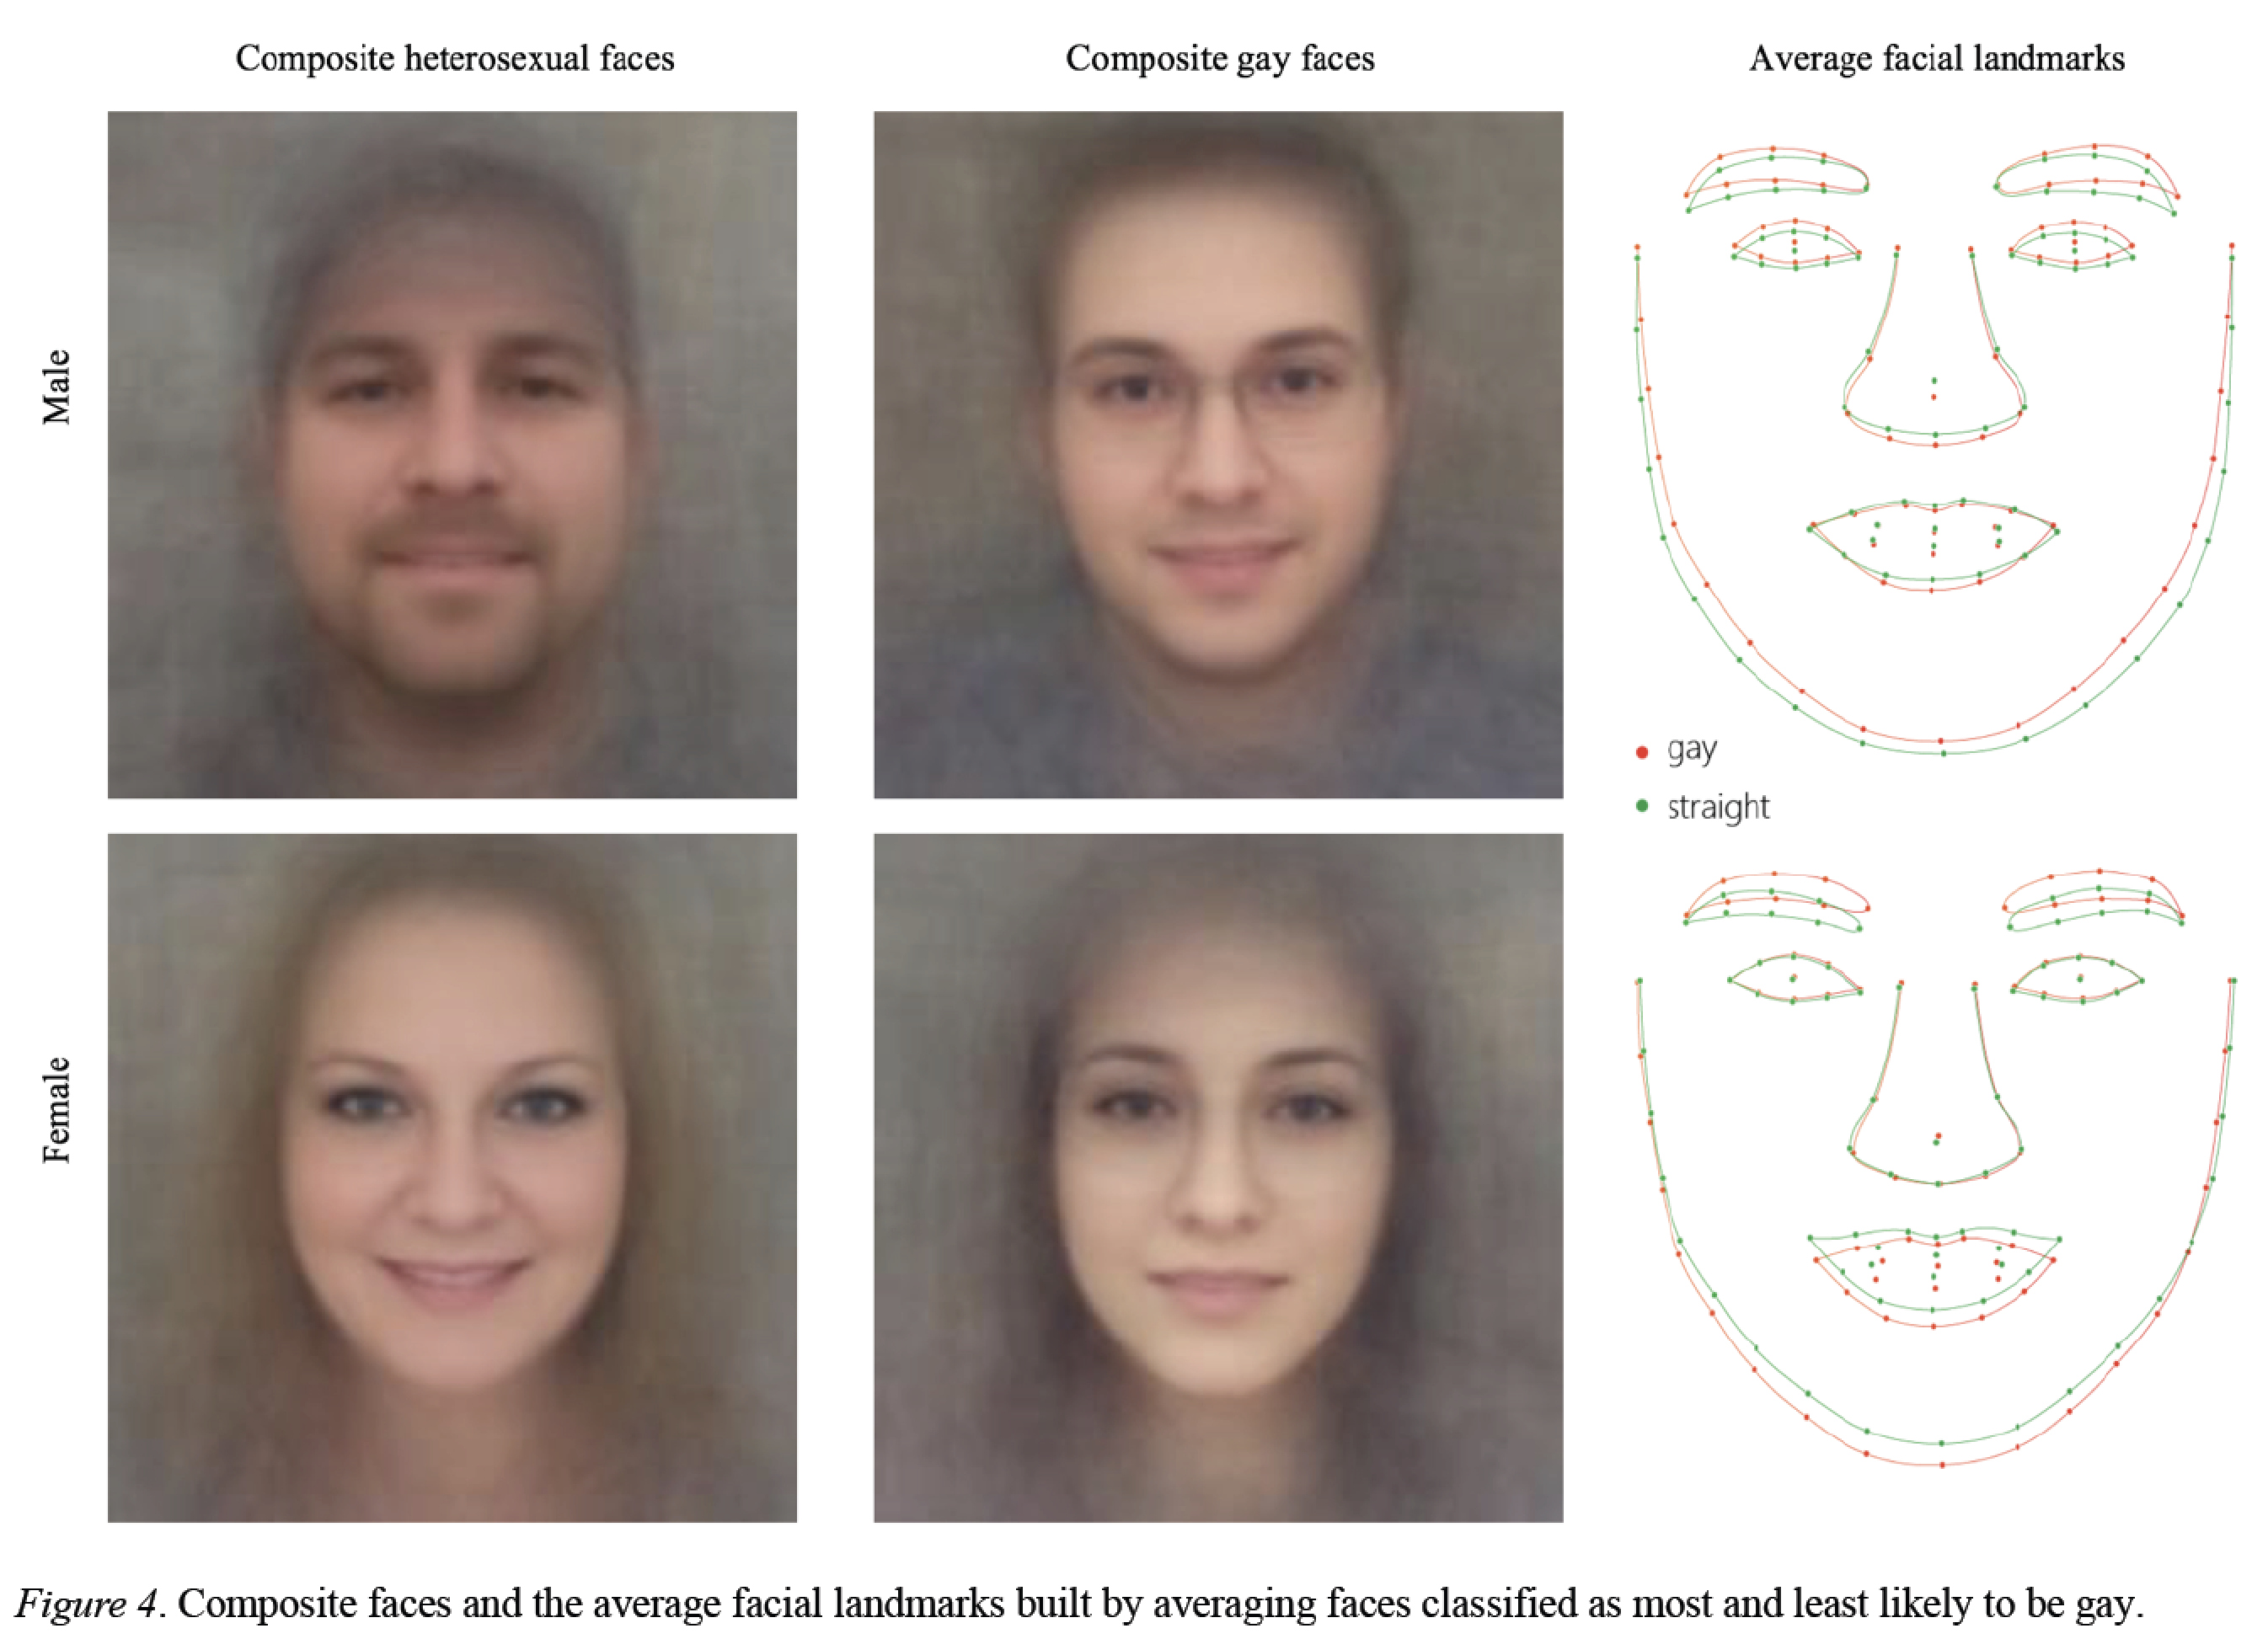 Composite faces for homosexual and heterosexual women and men, from Wang and Kosinski (2017)